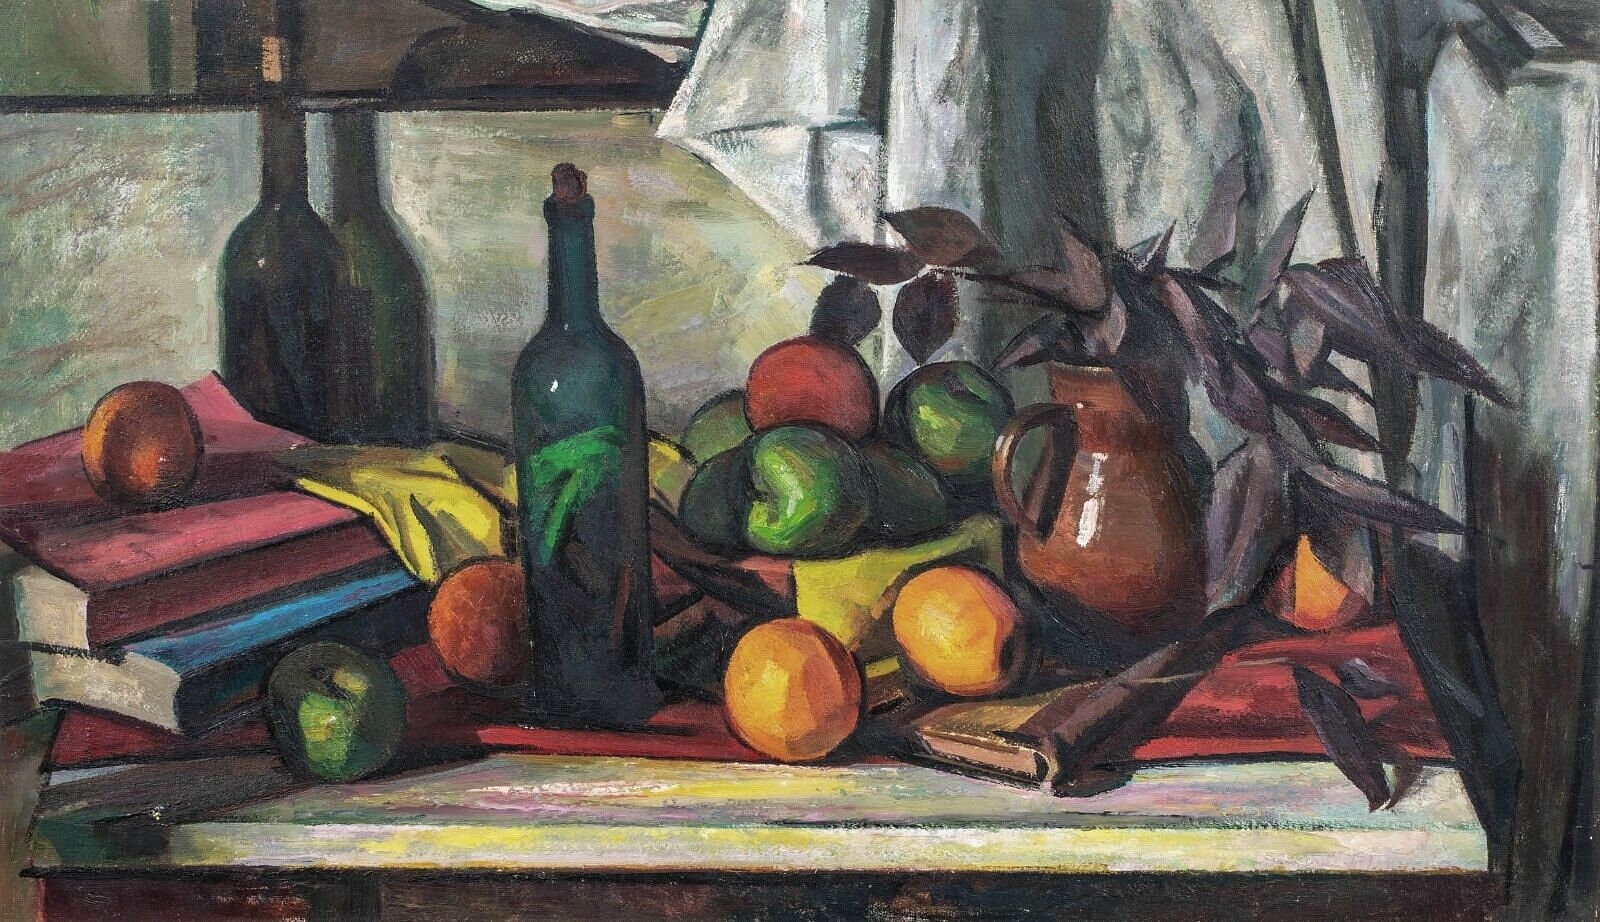 STILL LIFE OF FRUITS AND BOTTLES by Paul Cézanne, 1900